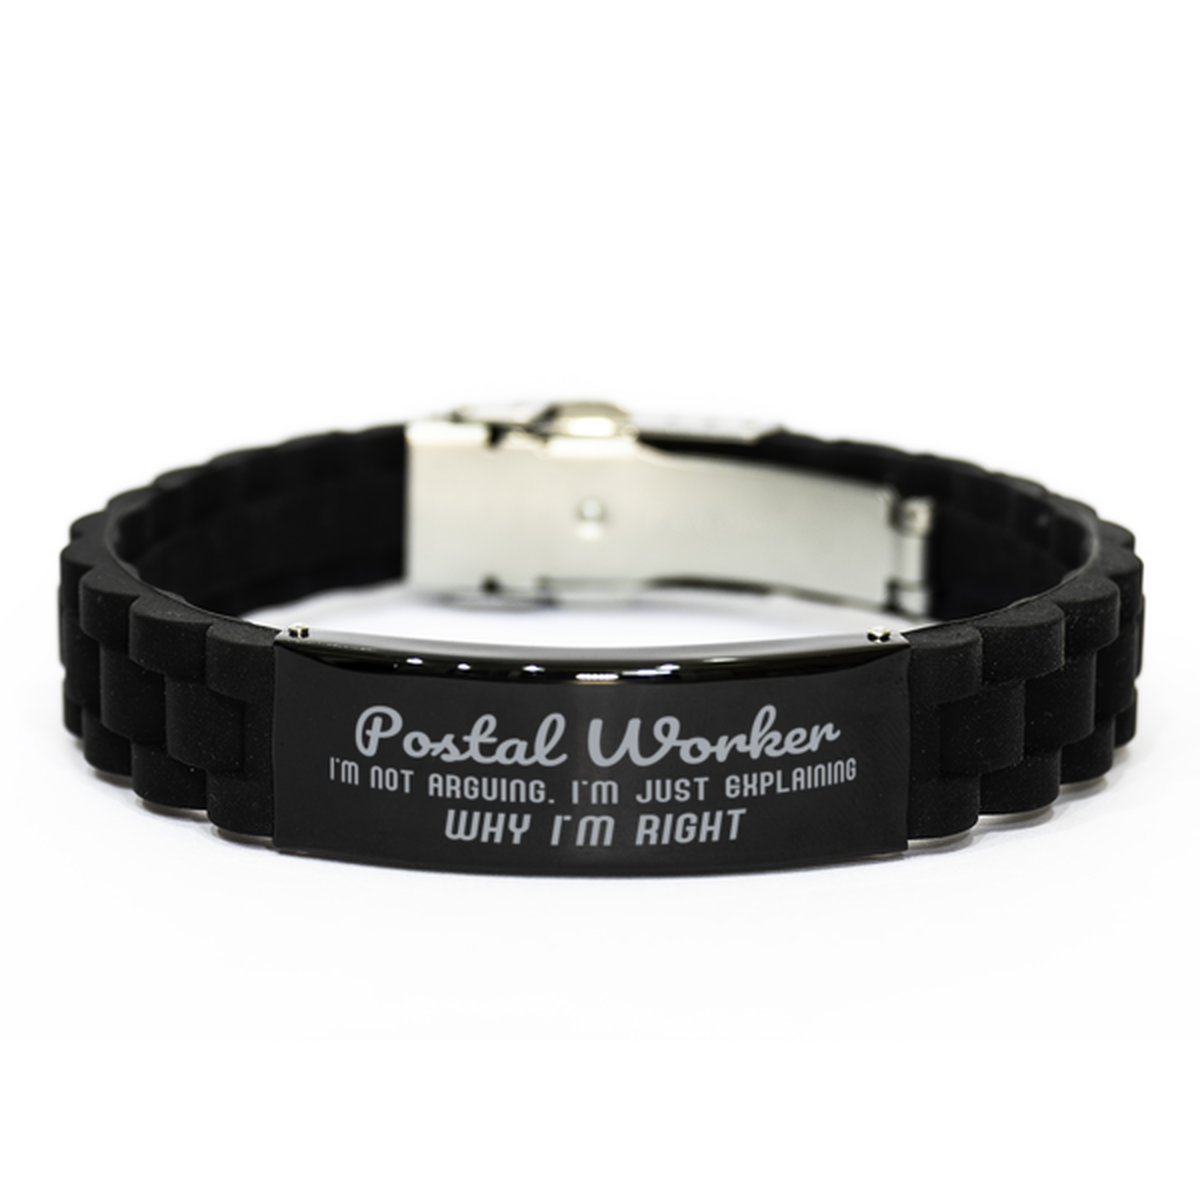 Postal Worker I'm not Arguing. I'm Just Explaining Why I'm RIGHT Black Glidelock Clasp Bracelet, Funny Saying Quote Postal Worker Gifts For Postal Worker Graduation Birthday Christmas Gifts for Men Women Coworker